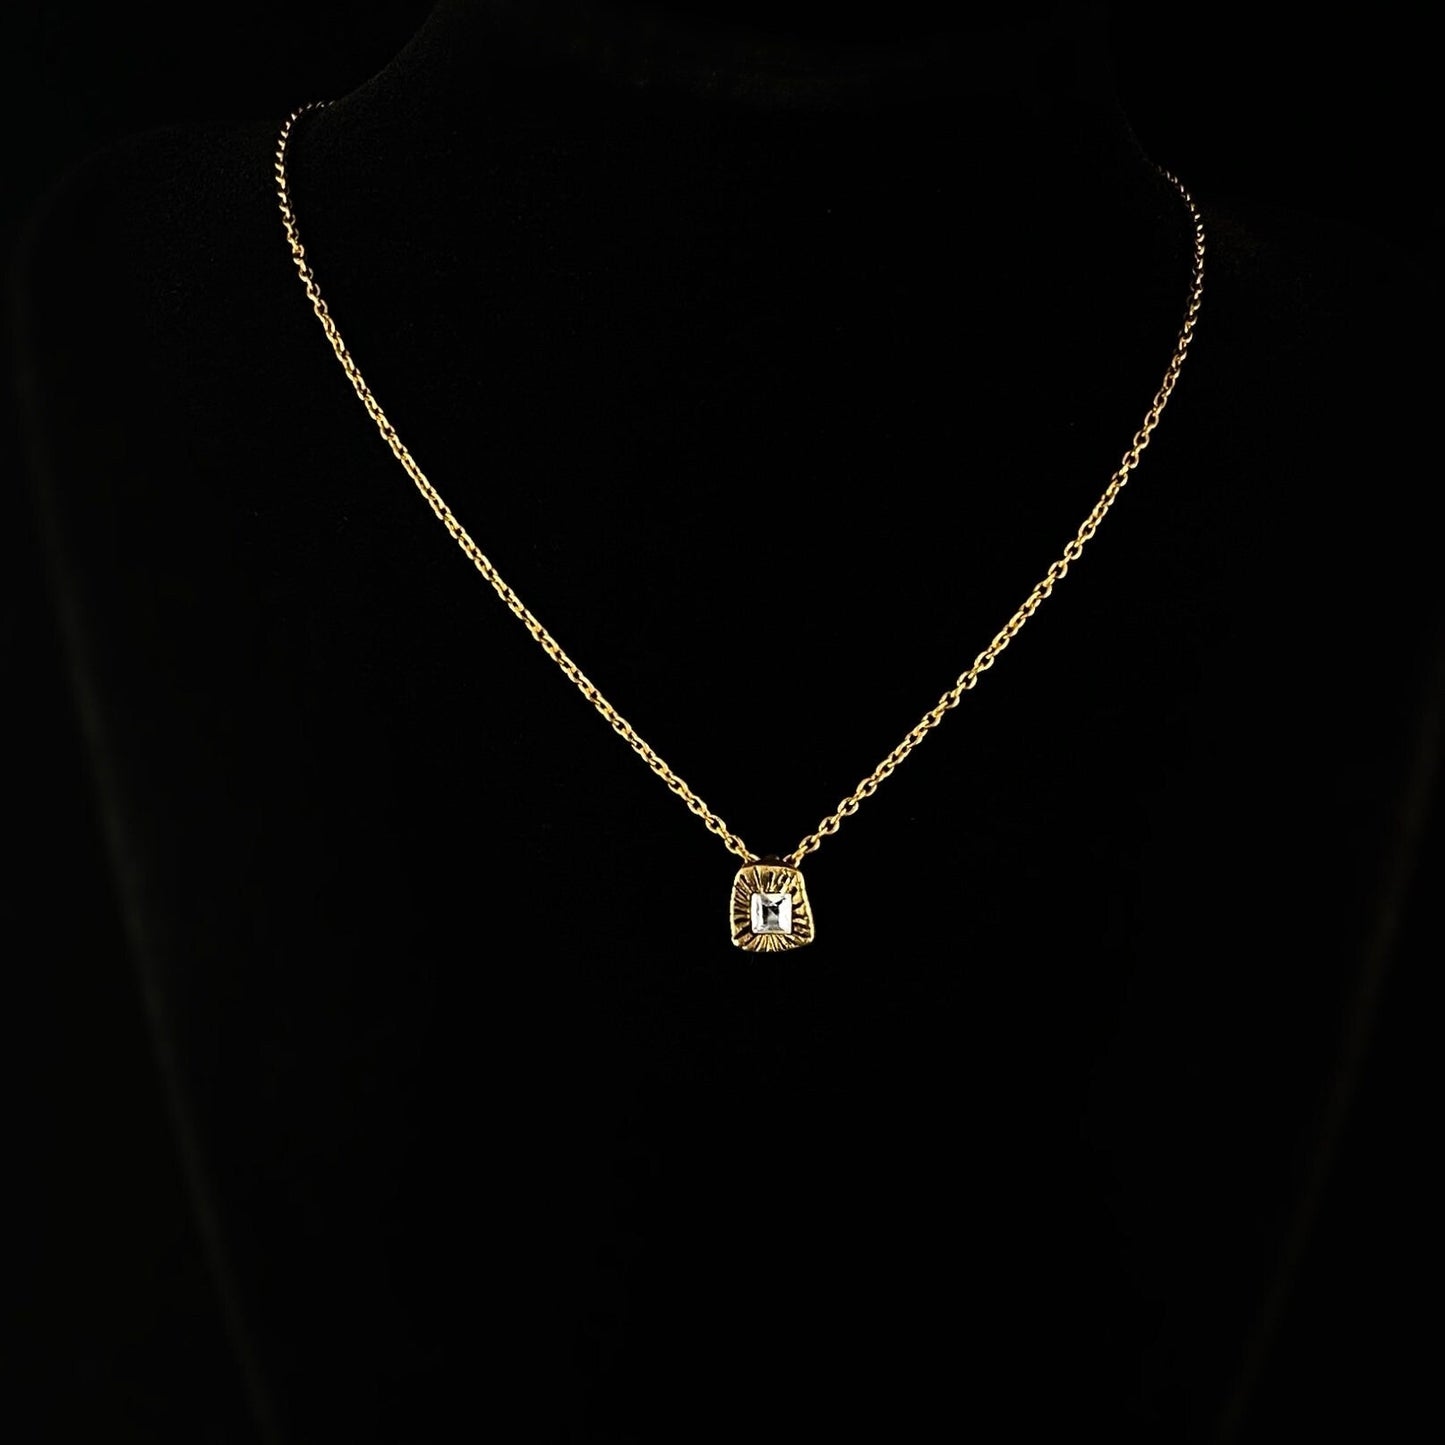 Rook and Crow Handmade Gold Dainty Pendant Necklace With Square Clear Crystal Center Accent - Ray, Made in USA